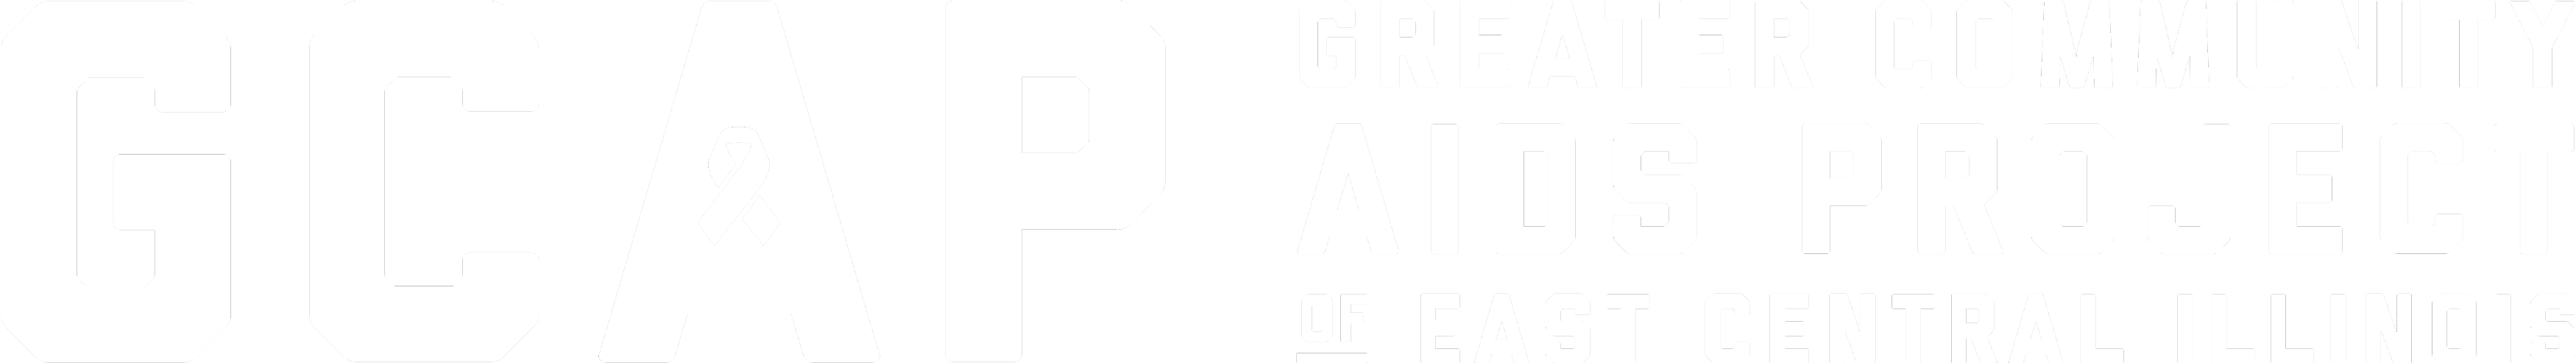 Greater Community Aids Project - Branding